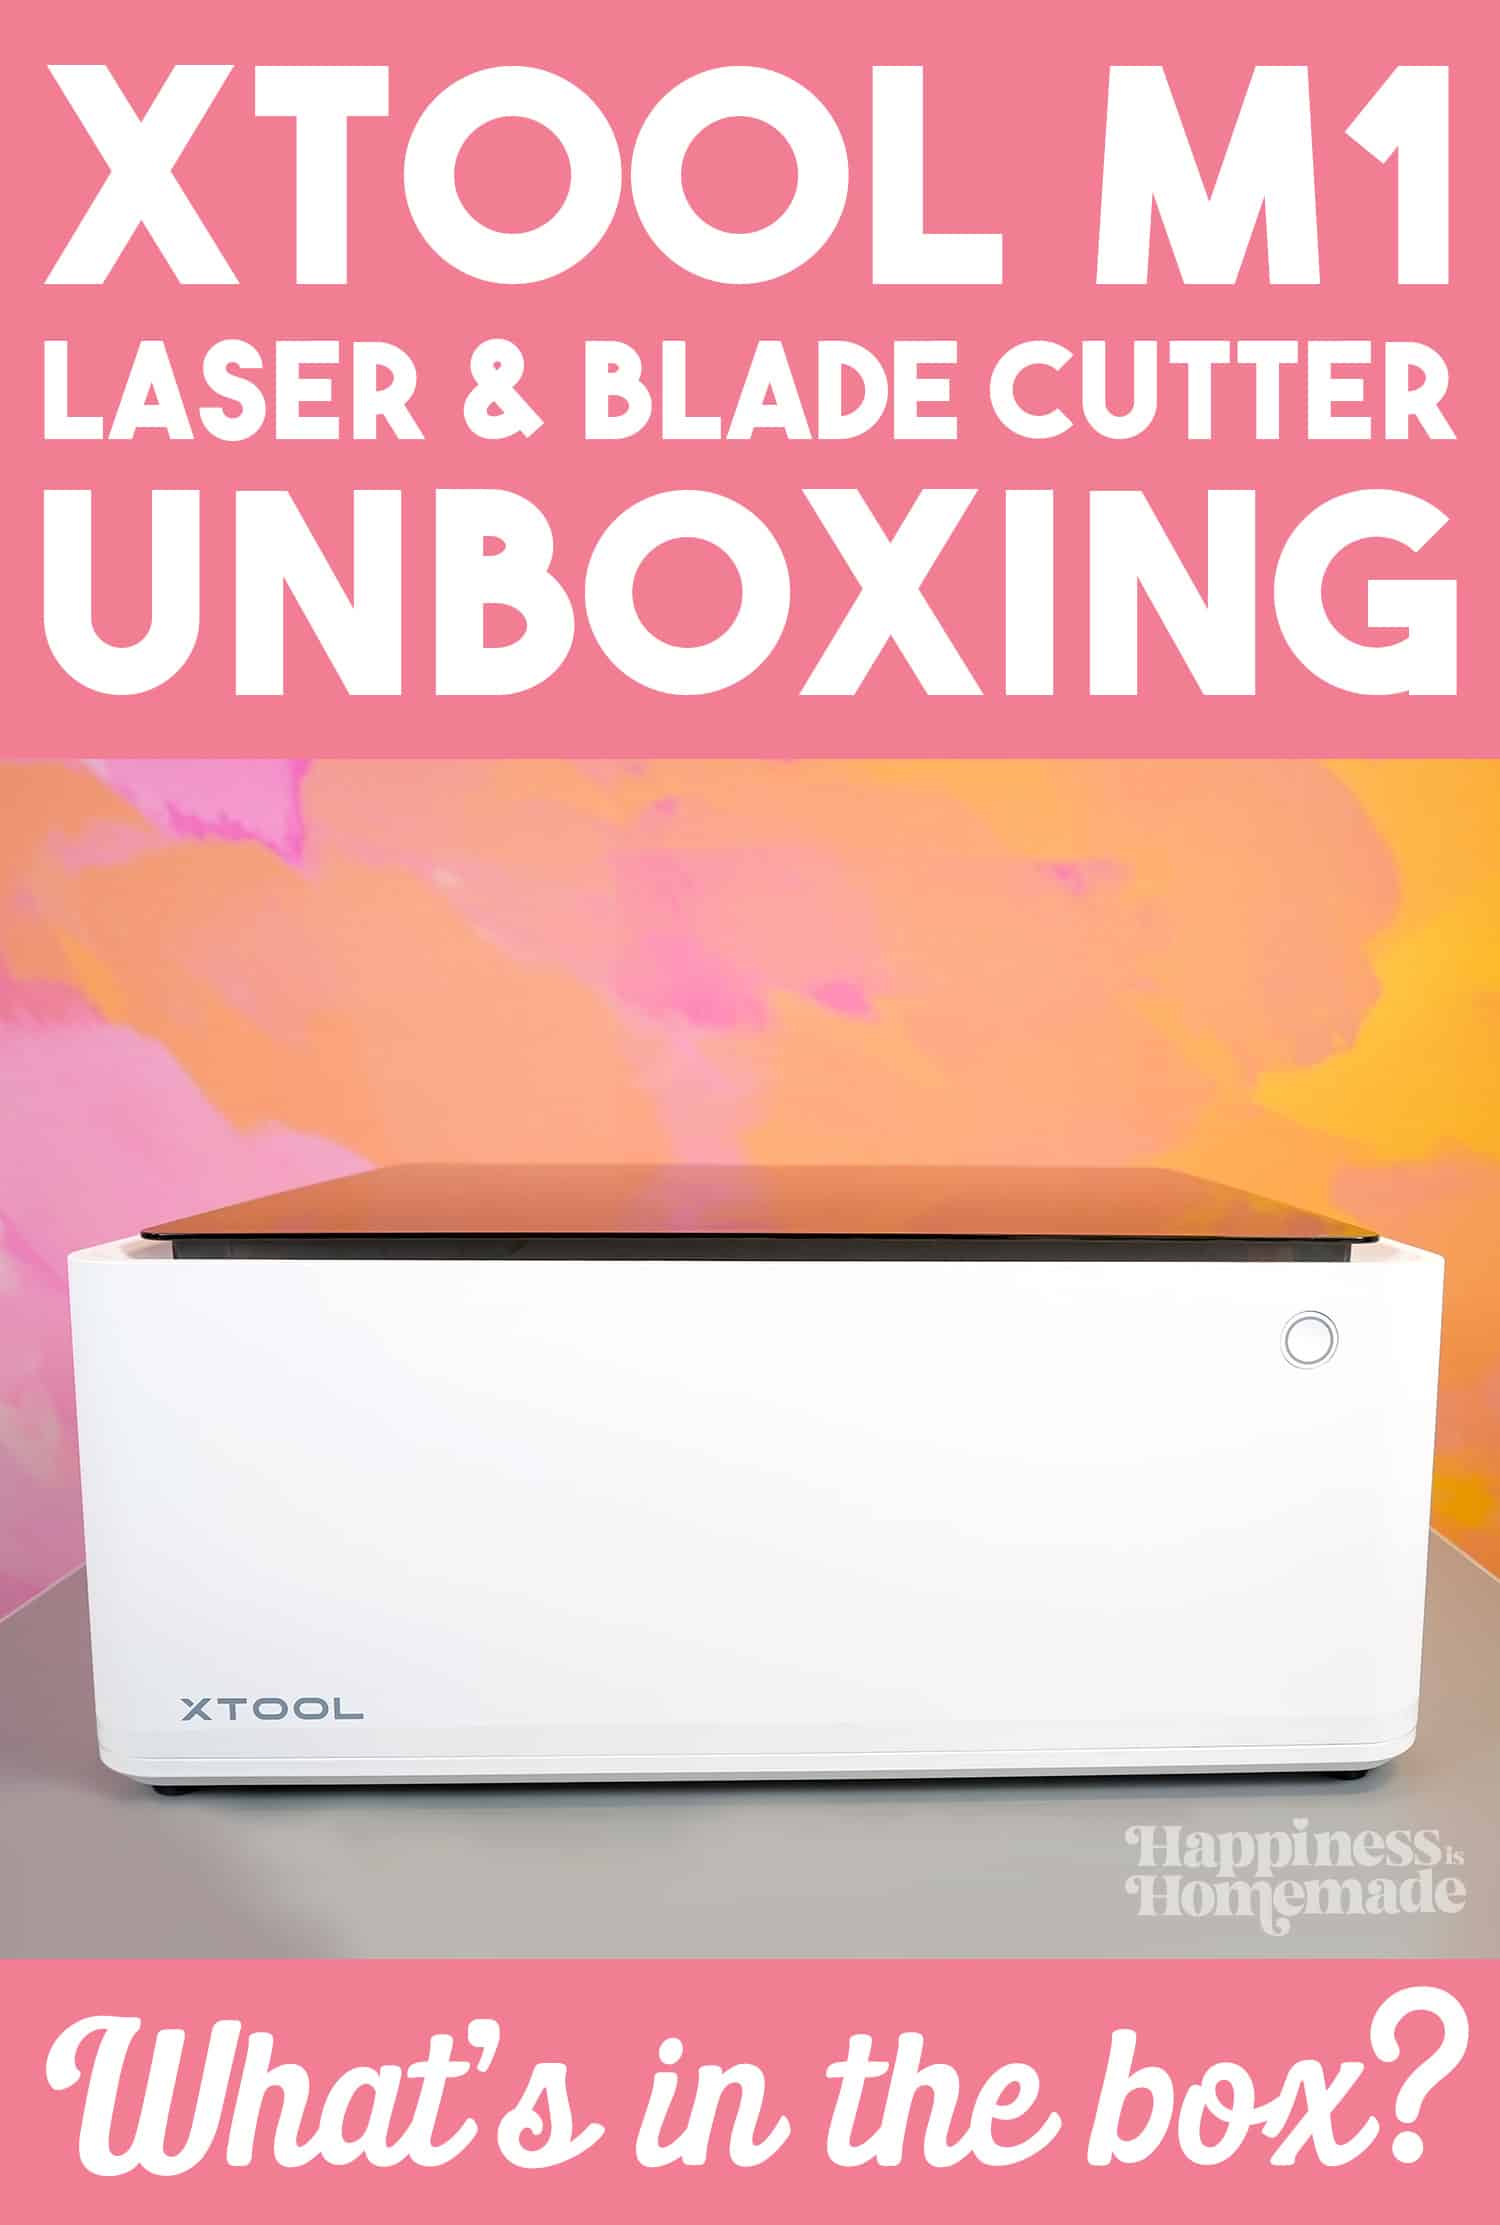 10 Reasons Crafters Will Love the xTool M1 Laser and Blade Cutter